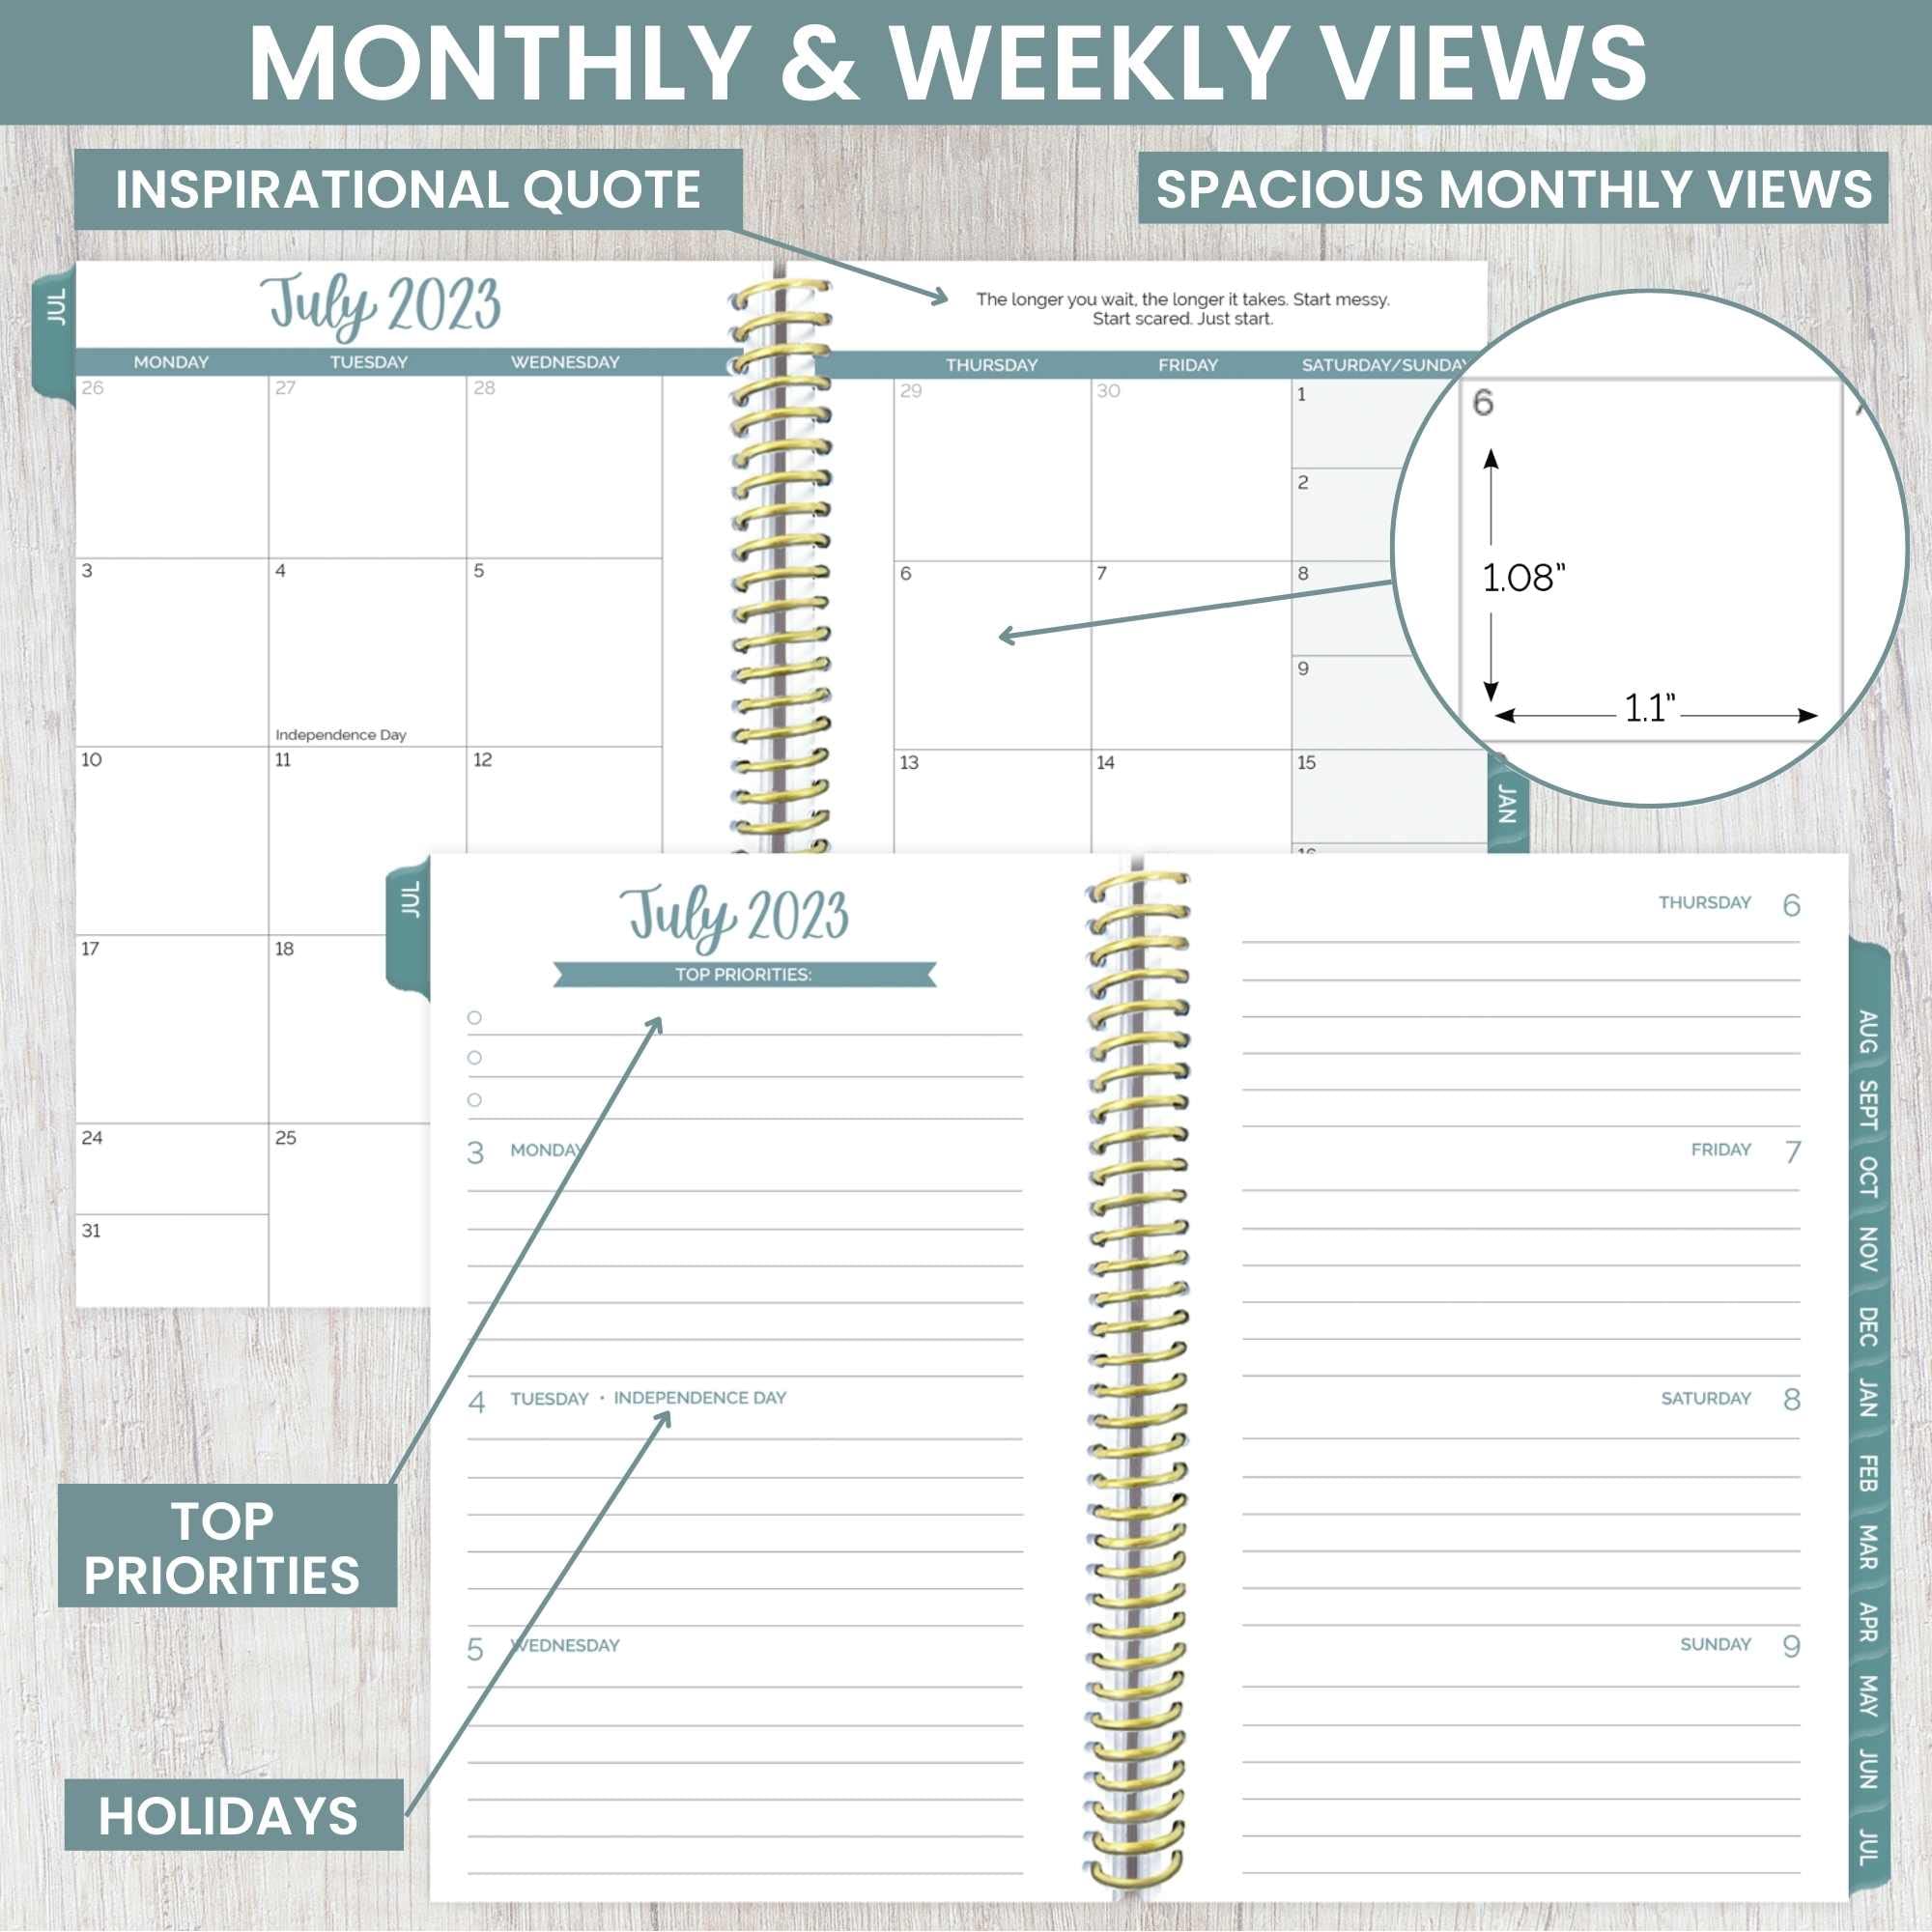 bloom daily planners 2023-2024 Pocket Planner - 4” x 6” - (July 2023 - July 2024) - MINI Weekly/Monthly Agenda Organizer & Calendar Book - Spread Kindness